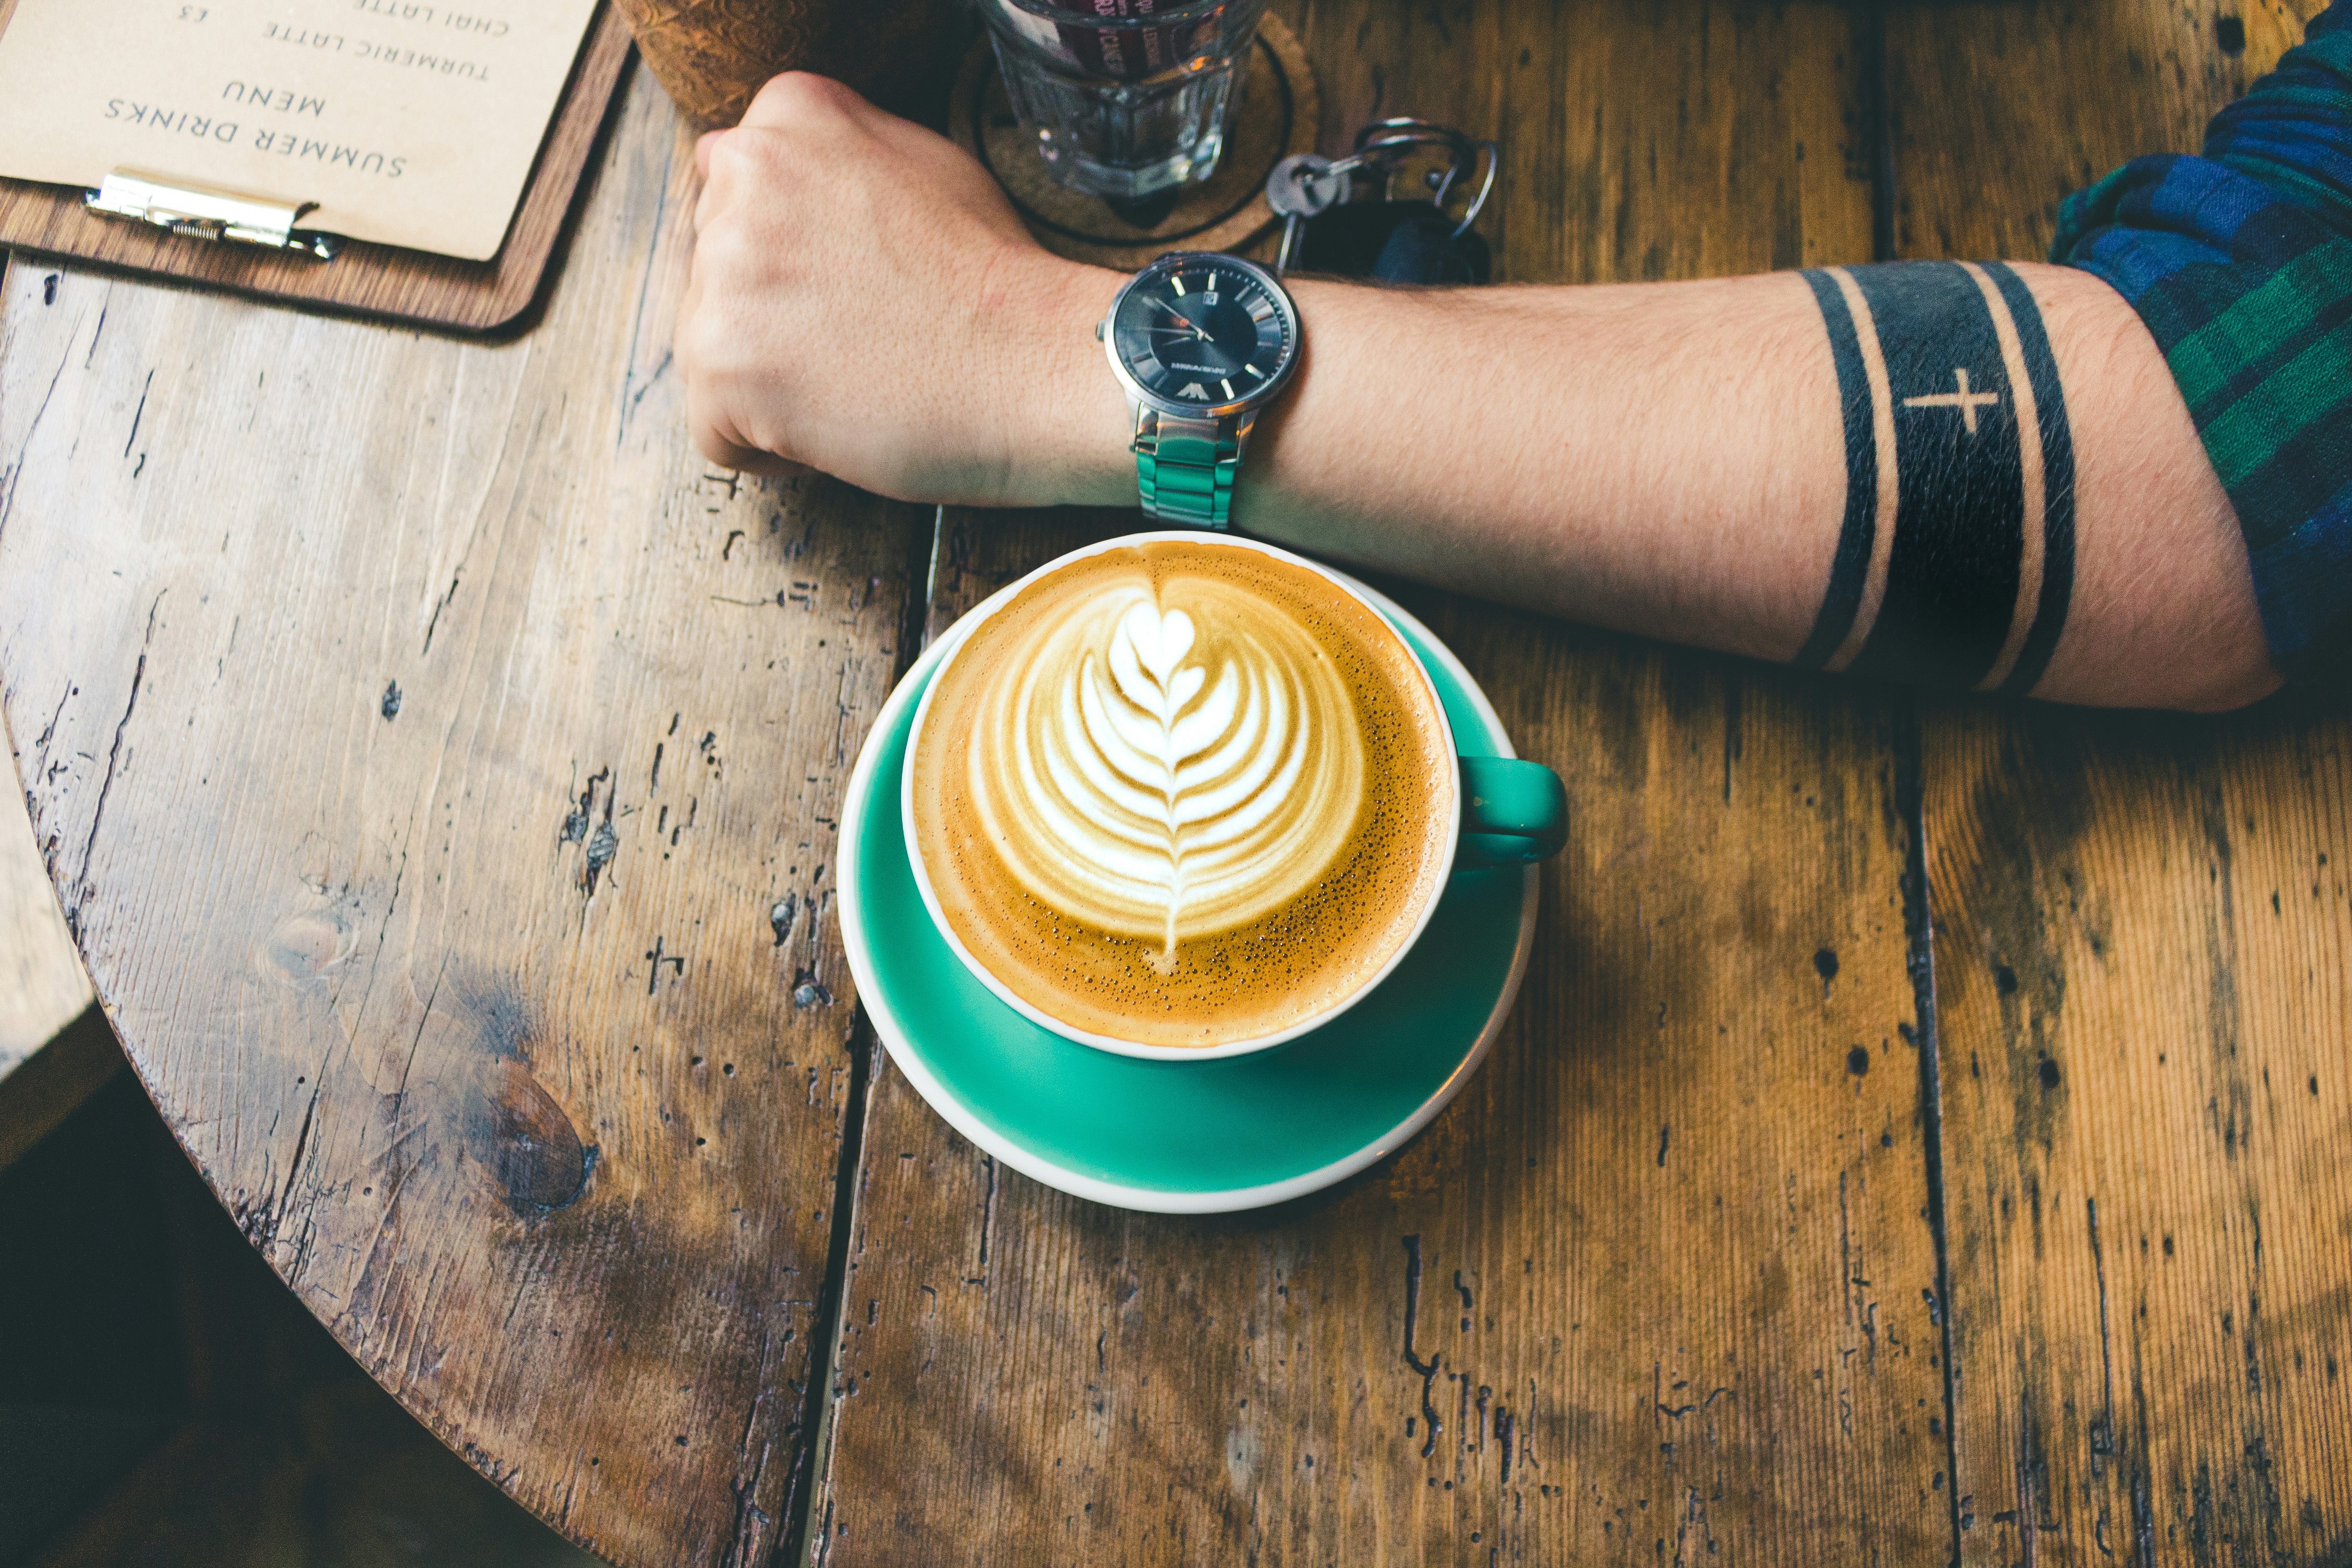 cappuccino next to man's arm whose wearing watch